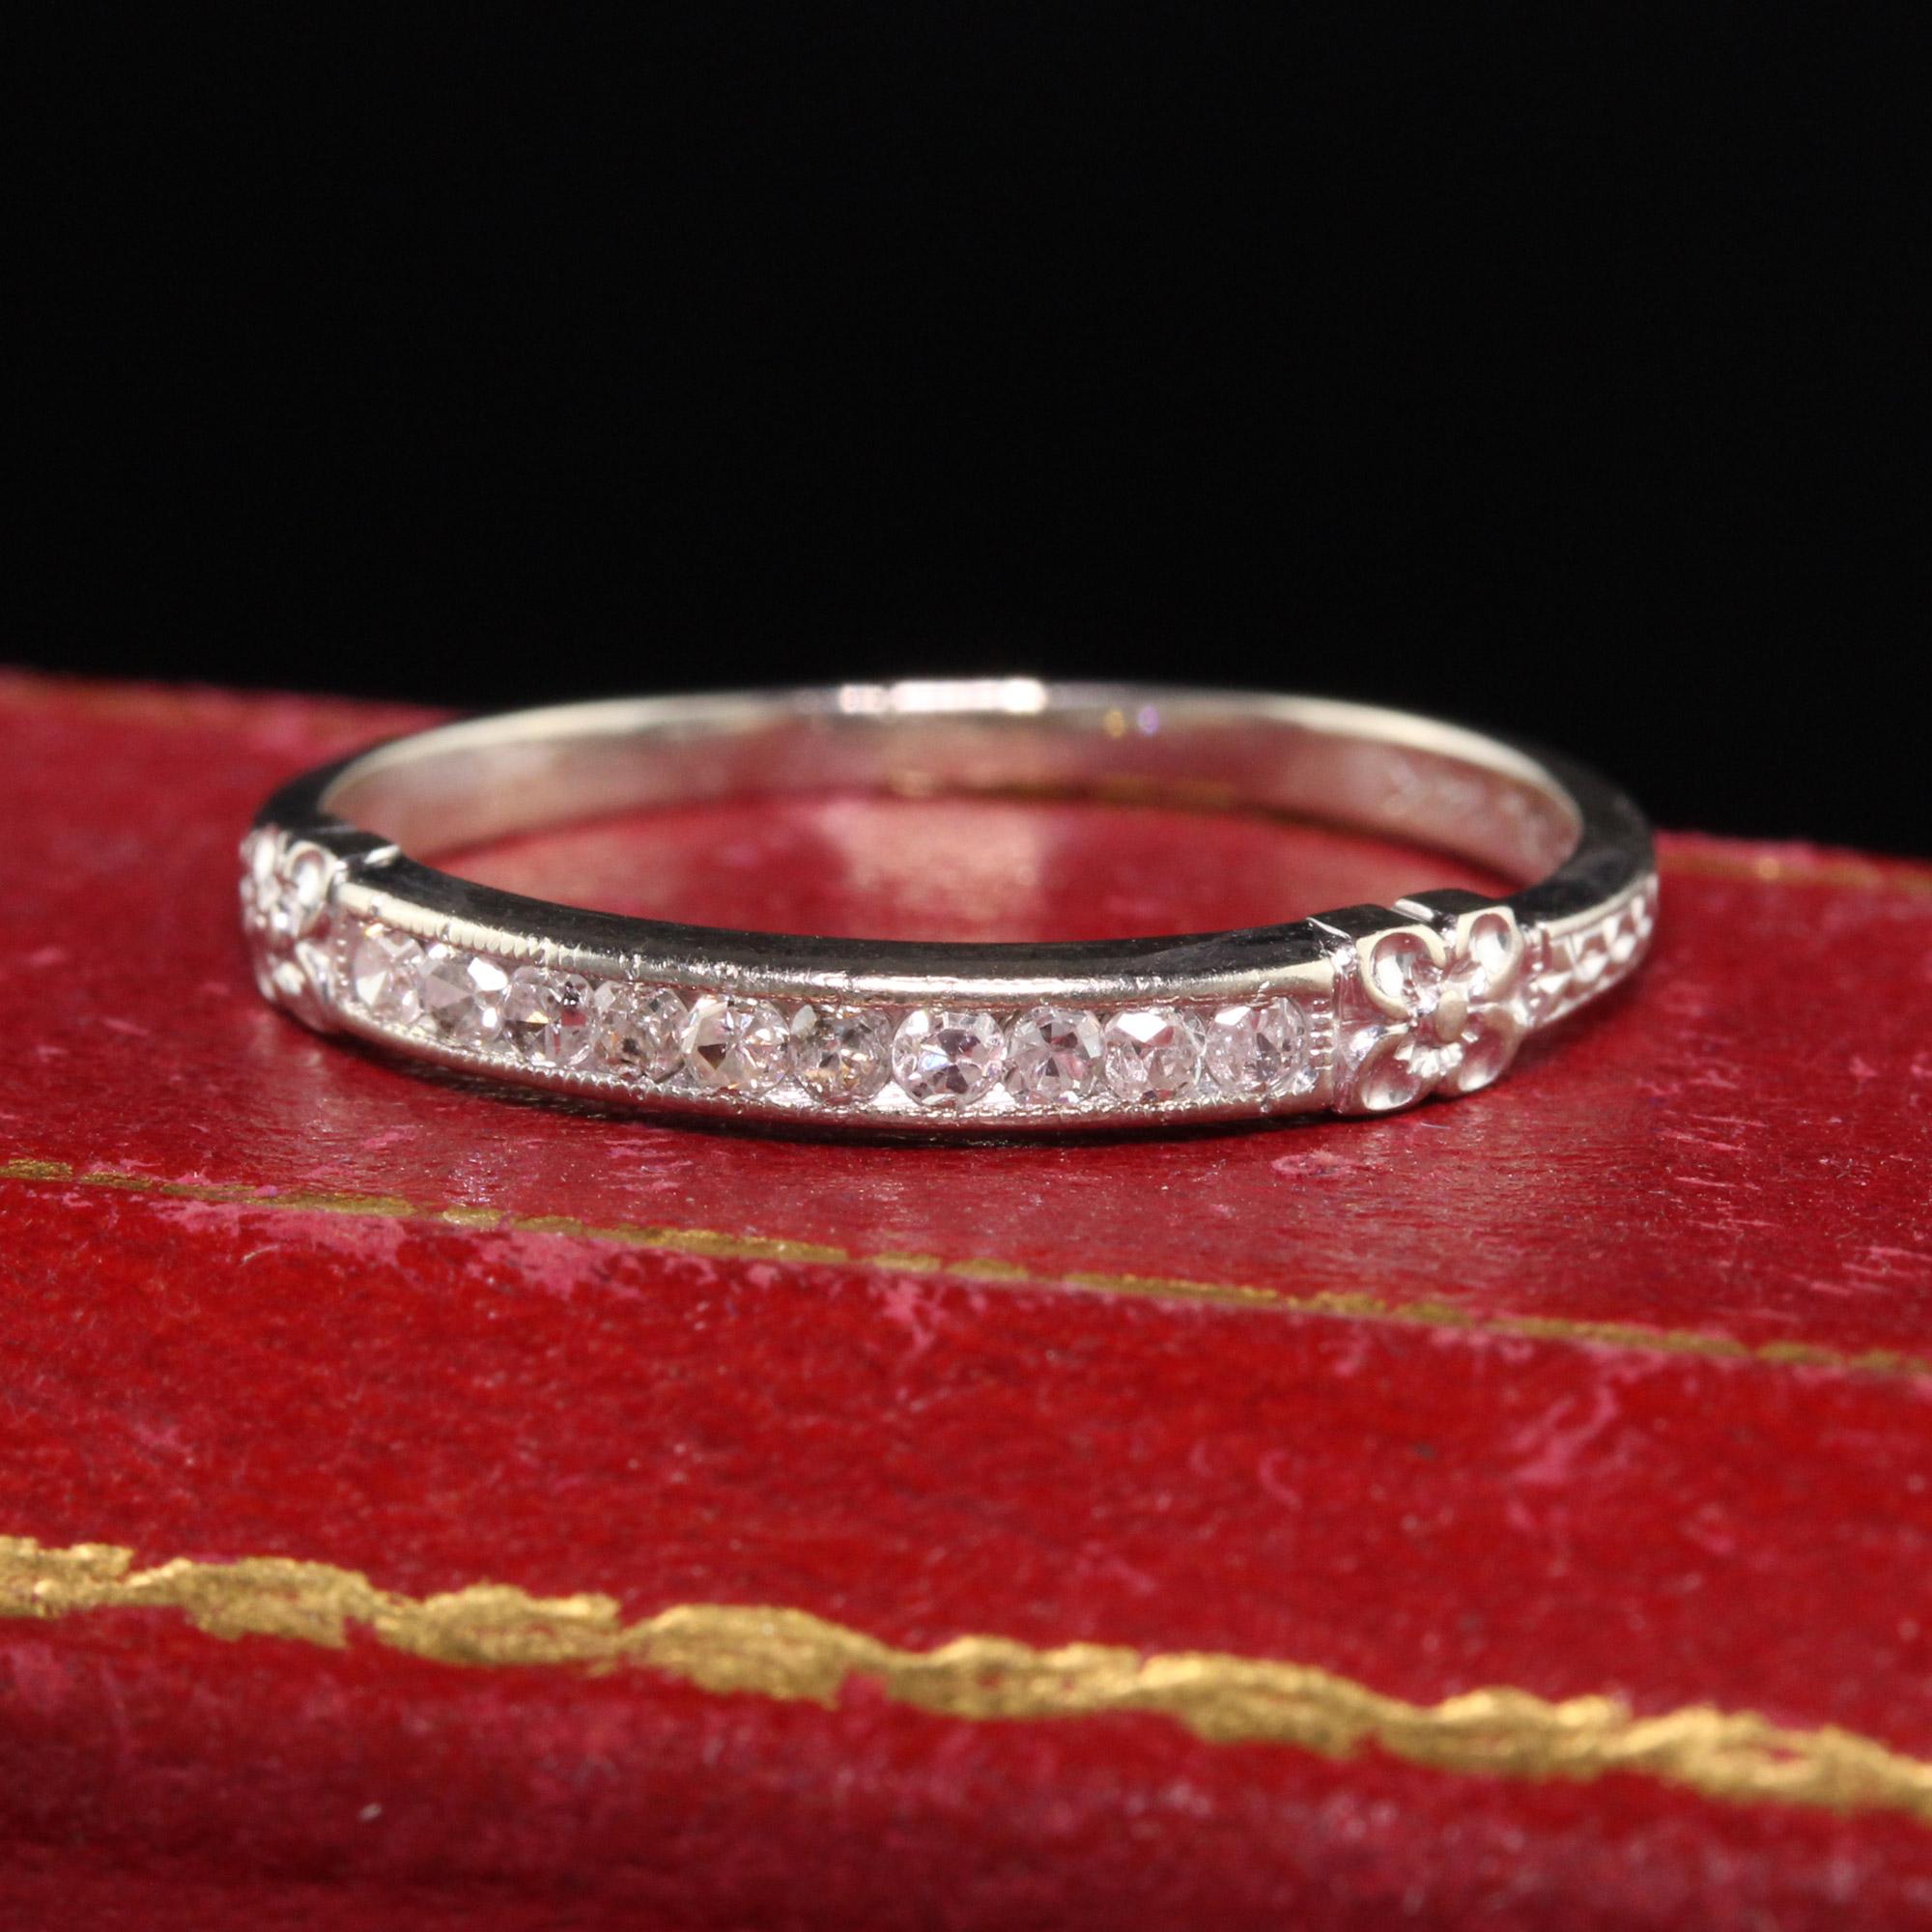 Beautiful Antique Art Deco Bristol 14K White Gold Engraved Diamond Wedding Band. This gorgeous band features single cut diamond on the top with engraved blossom accents on each side. It is in great condition.

Item #R1115

Metal: 14K White